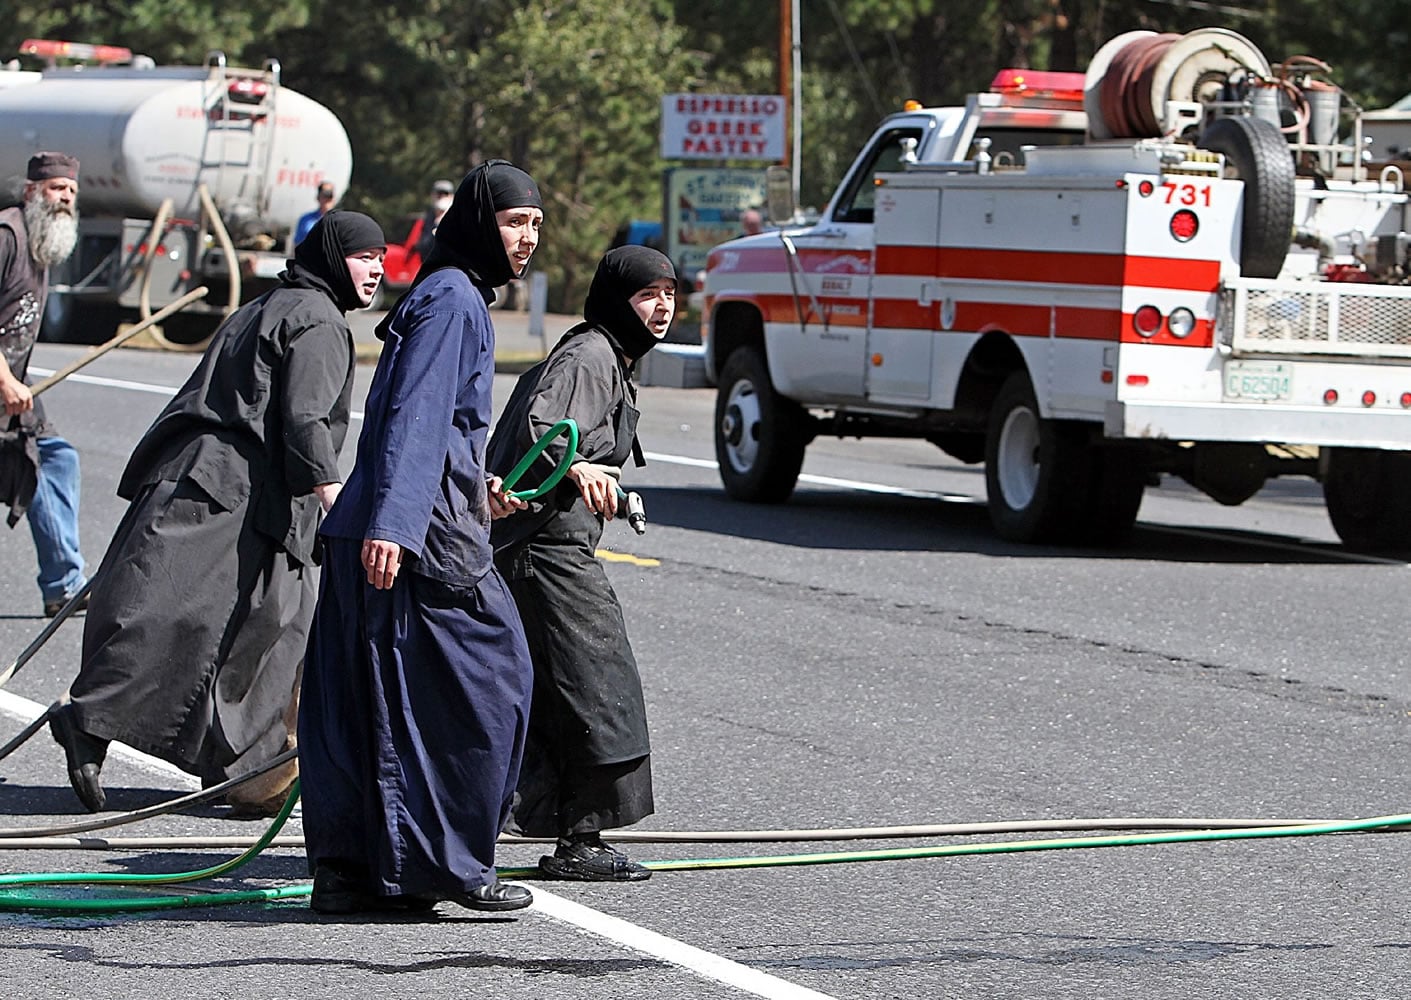 Three sisters from Saint Johns Monastery, about 10 miles east of Goldendale, race across Highway 97 on Wednesday.  The nuns were running garden hoses across the highway to fight the fire, along with using rags to beat the flames down near their monastery.